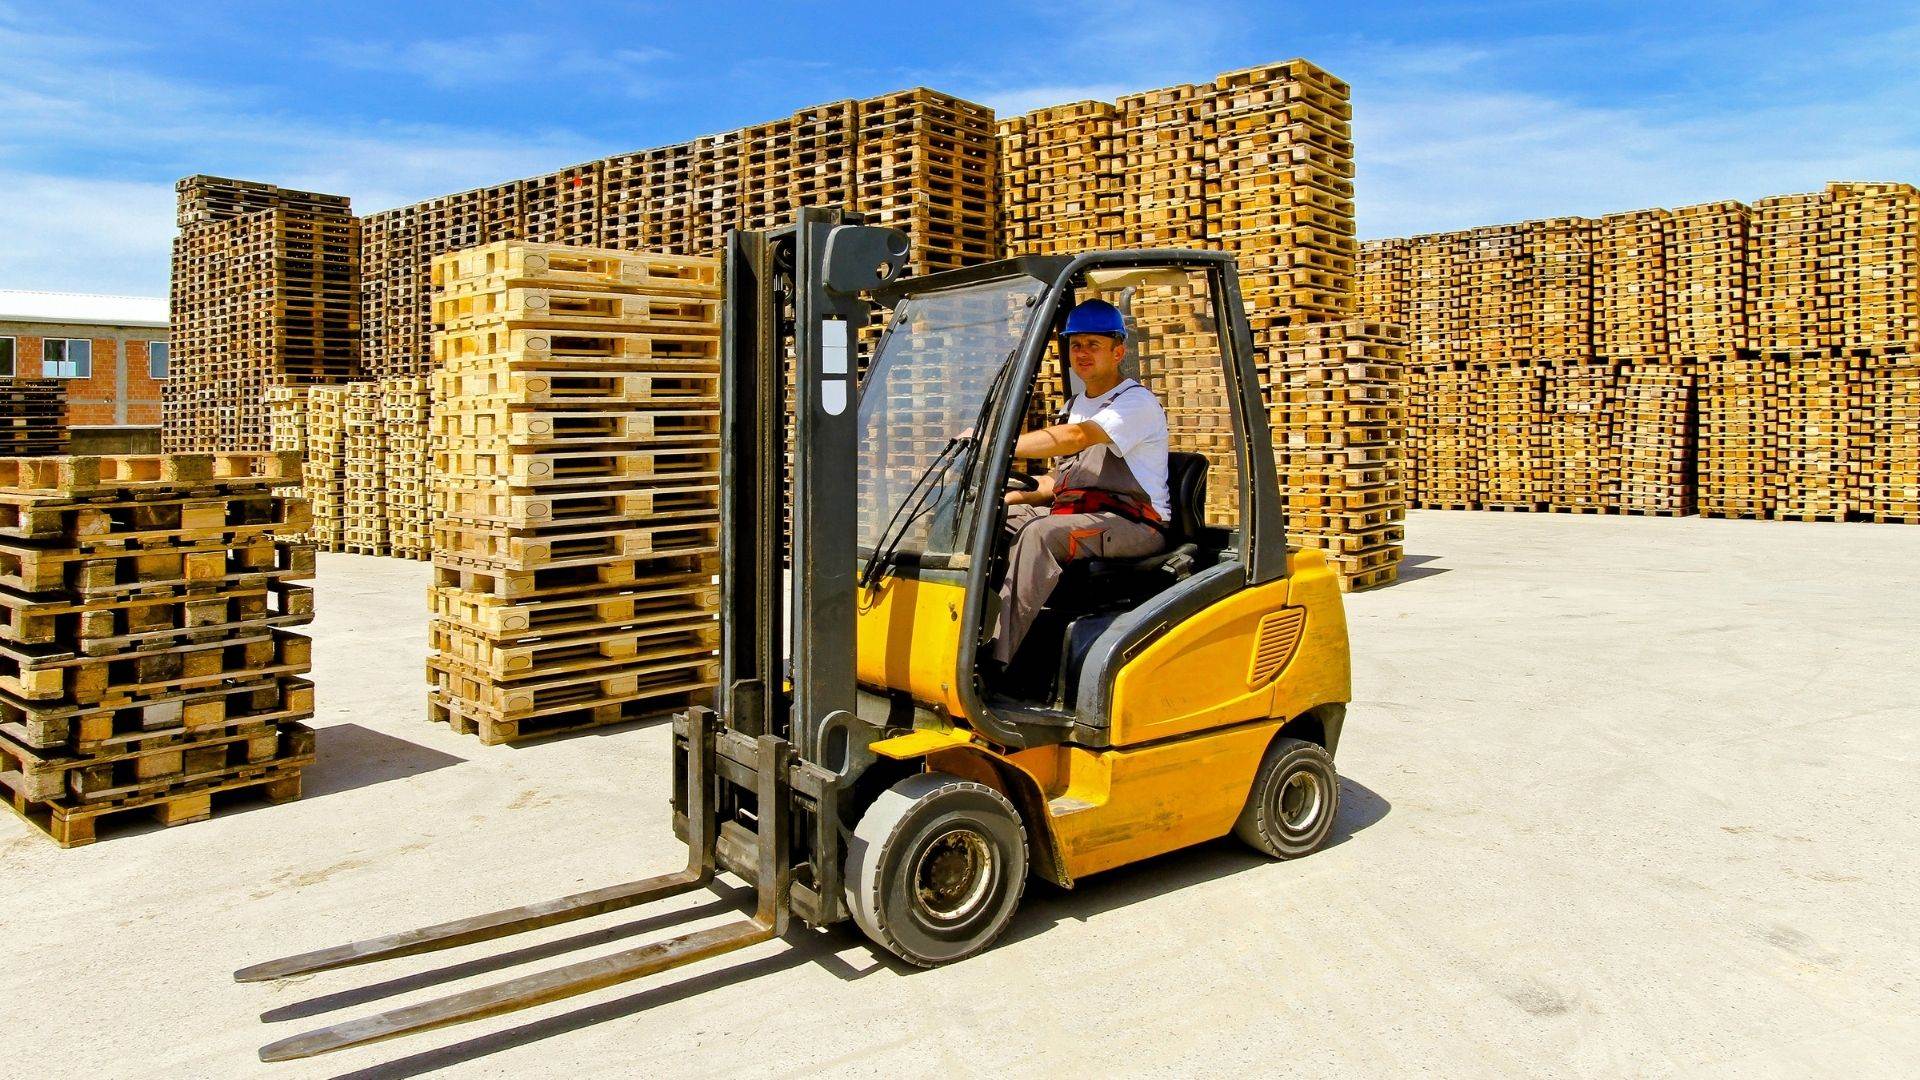 ONSITE COUNTERBALANCED FORKLIFT OPERATOR, Security Guard, Mainland Safety, First Aid Training Services, Surrey, BC